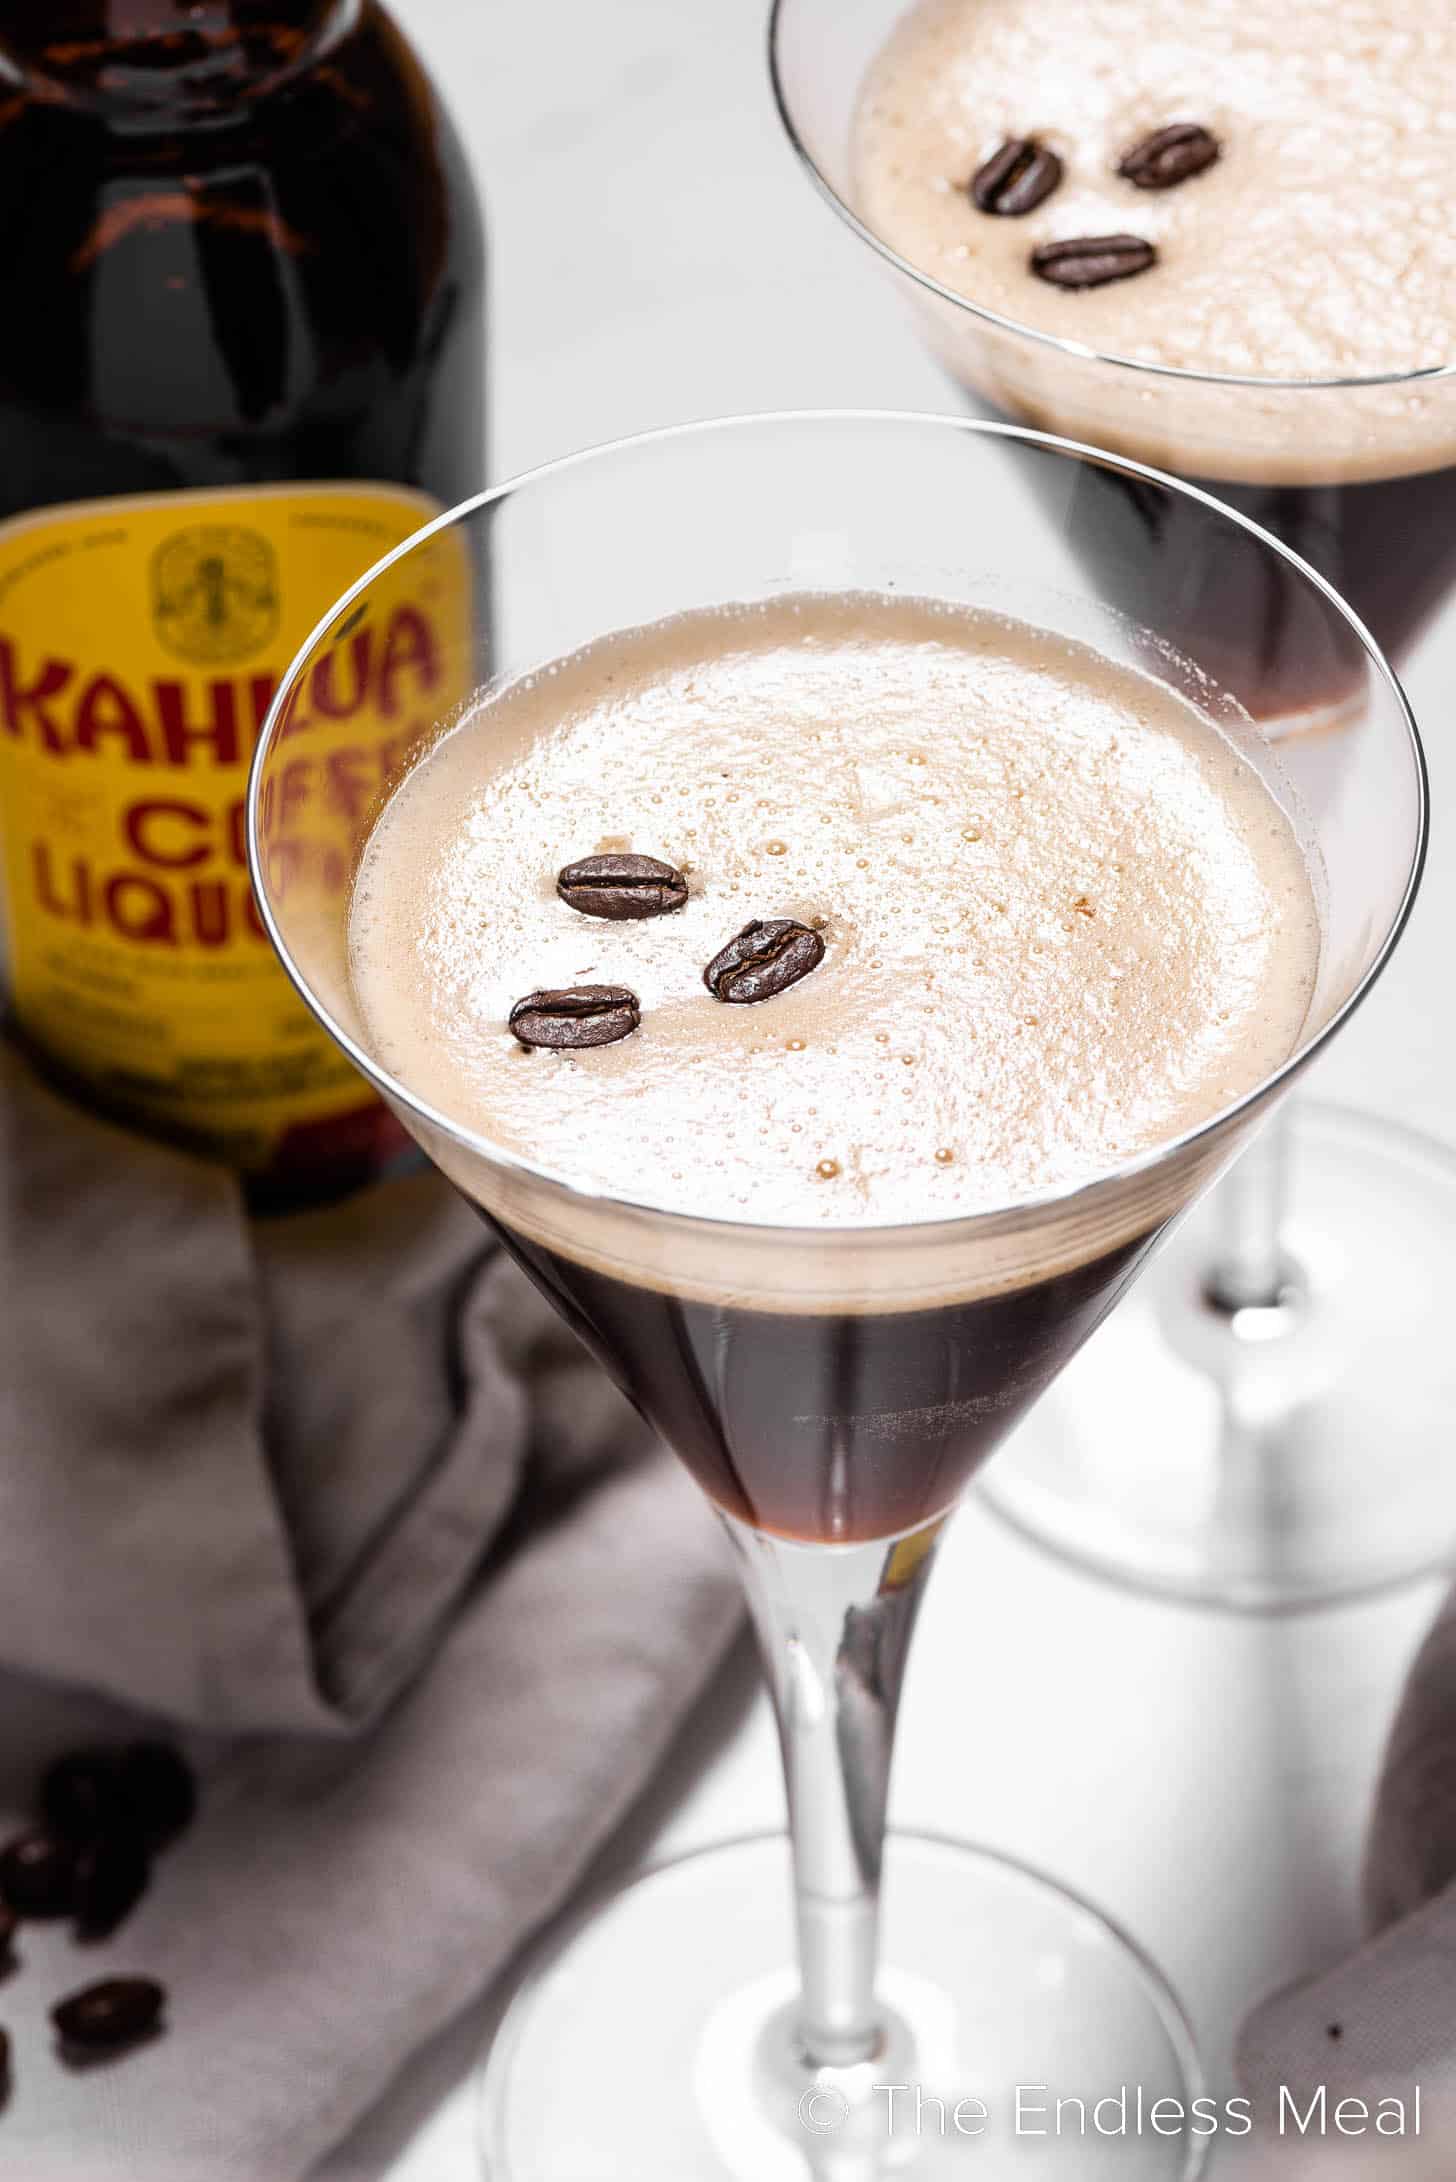 Two espresso martinis with a bottle of Kahlua.